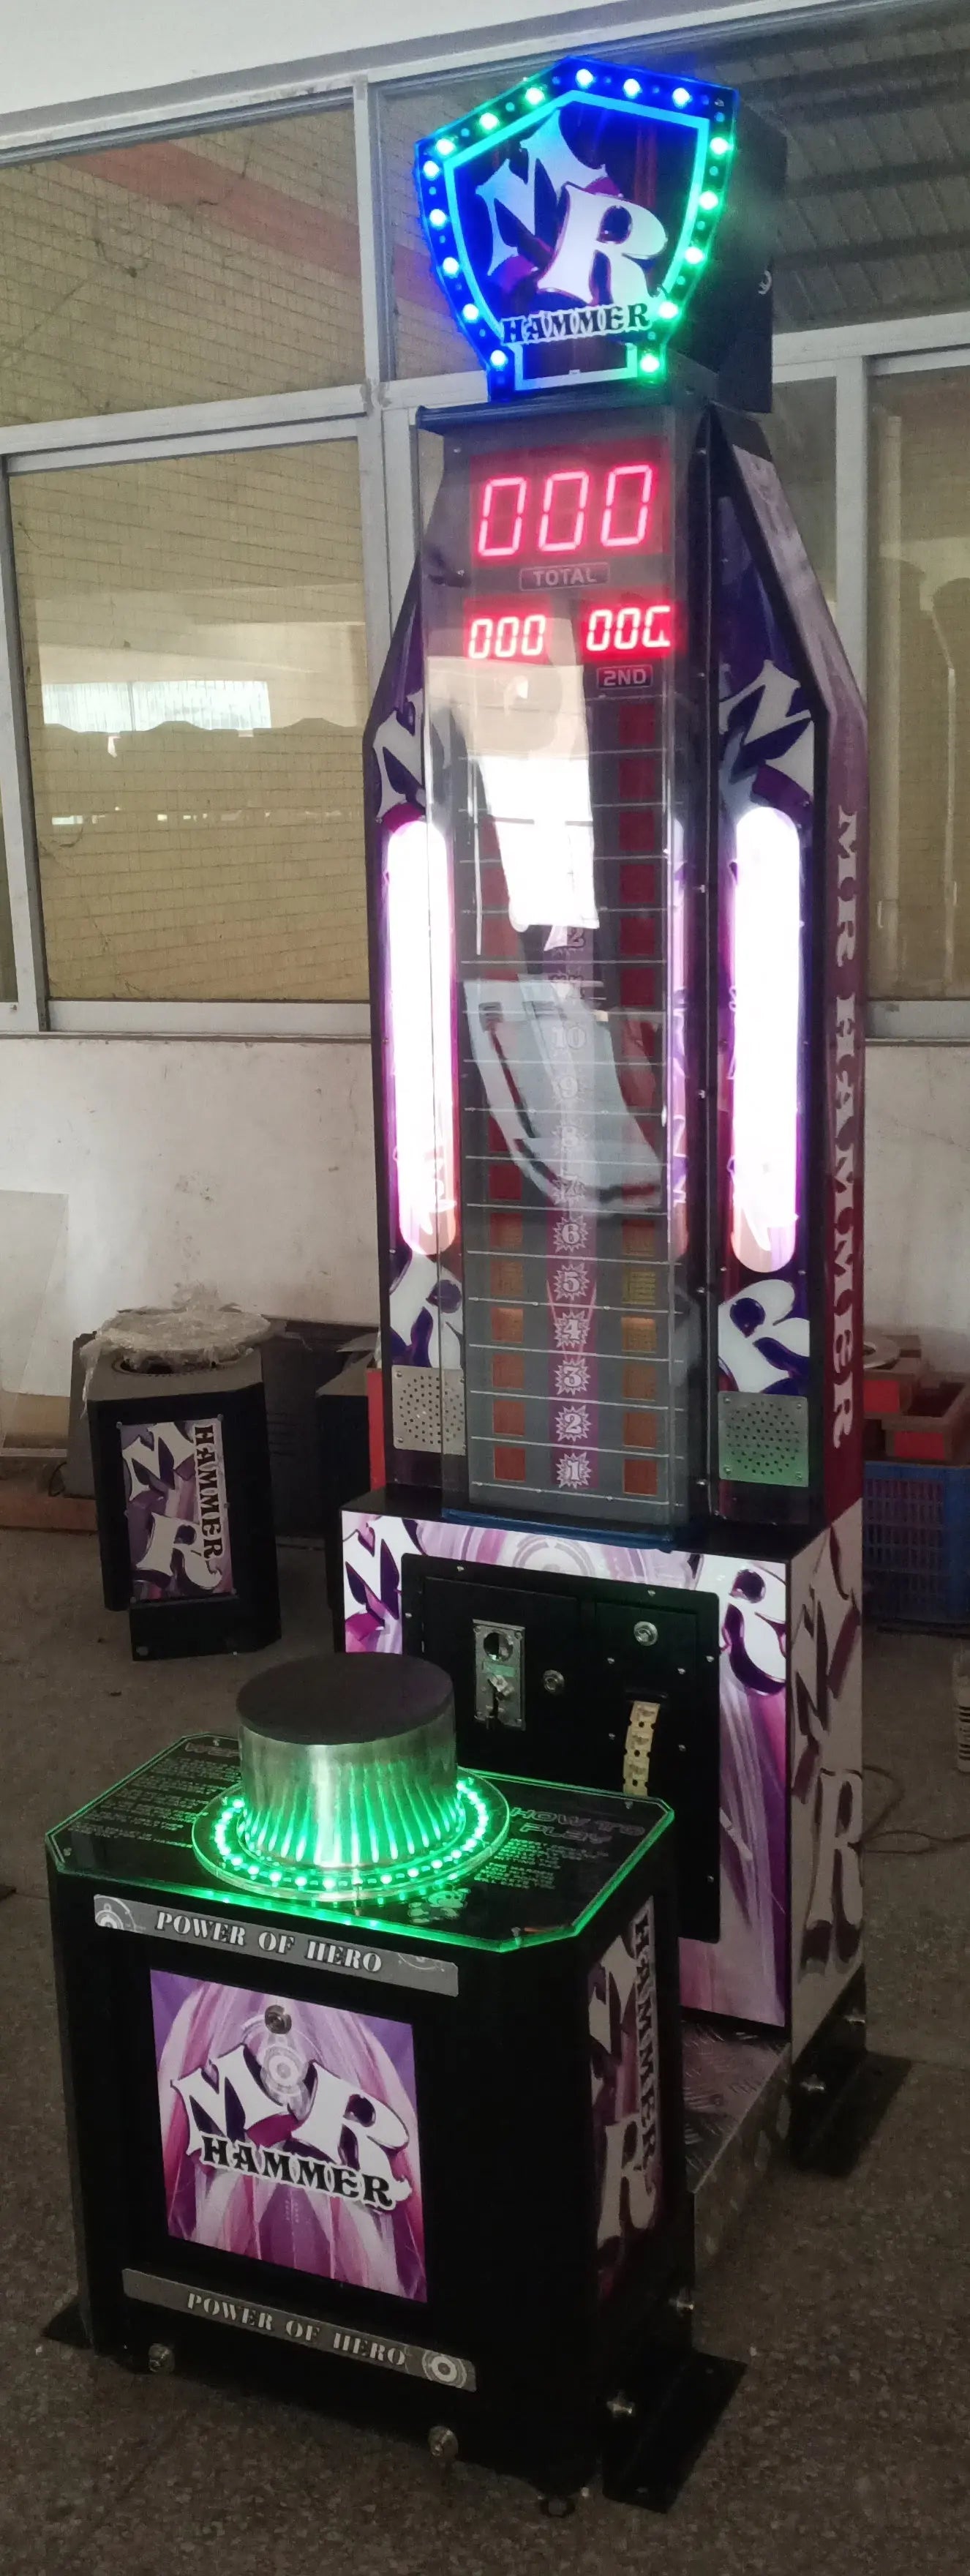 MR-Hammer-Arcade-sport-game-machine-Amusement-Electronic-Coin-Operated-boxing-games-Tomy-Arcade